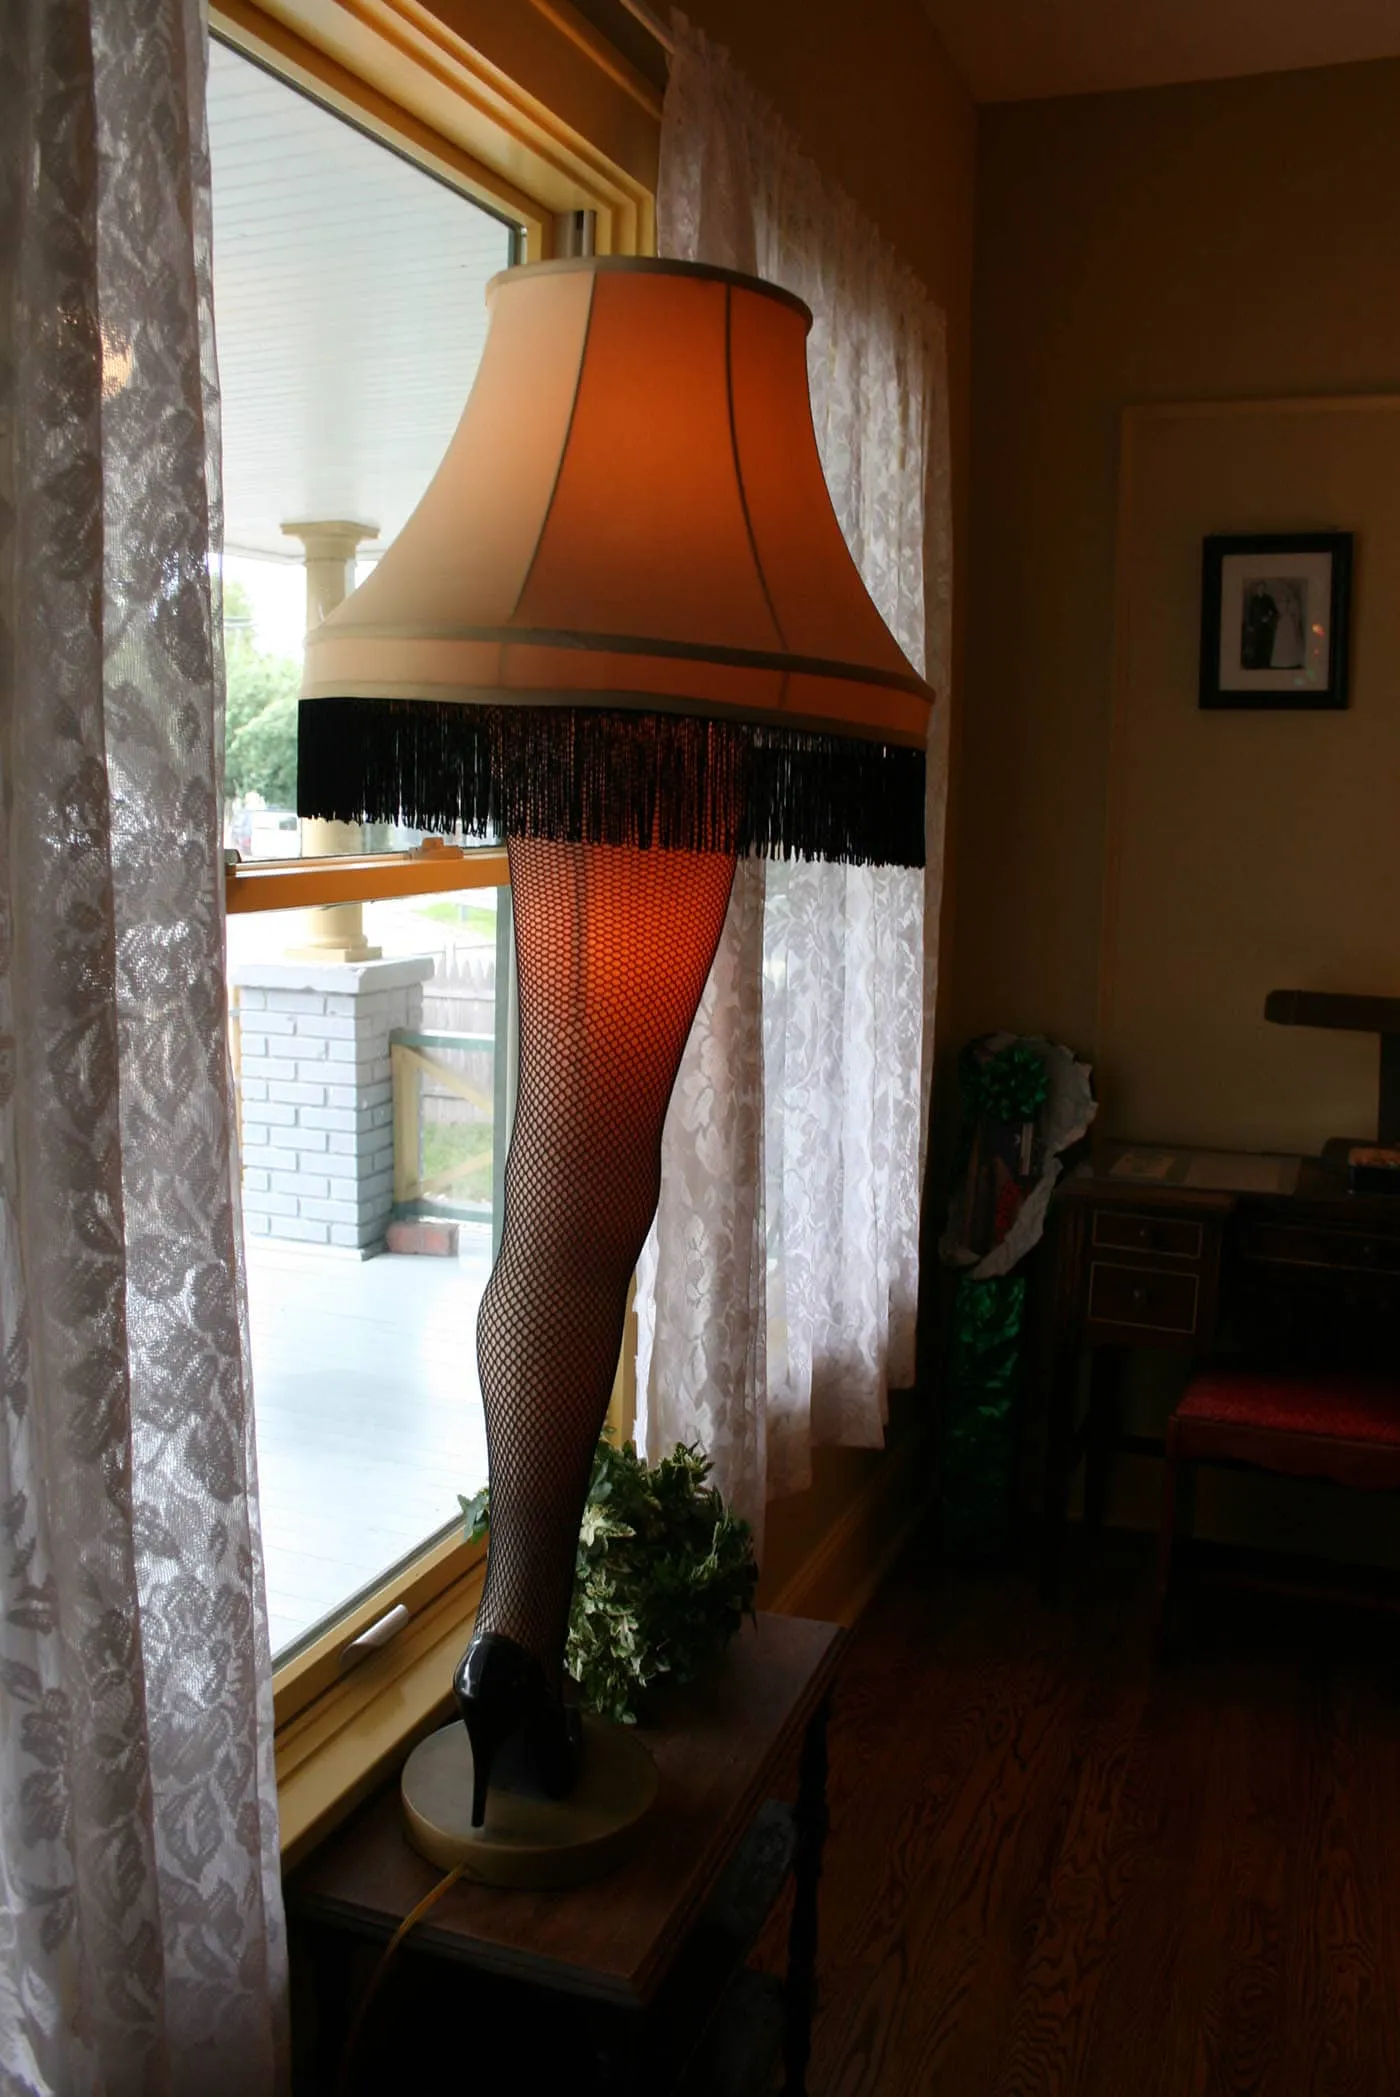 Leg Lamp in A Christmas Story House in Cleveland, Ohio